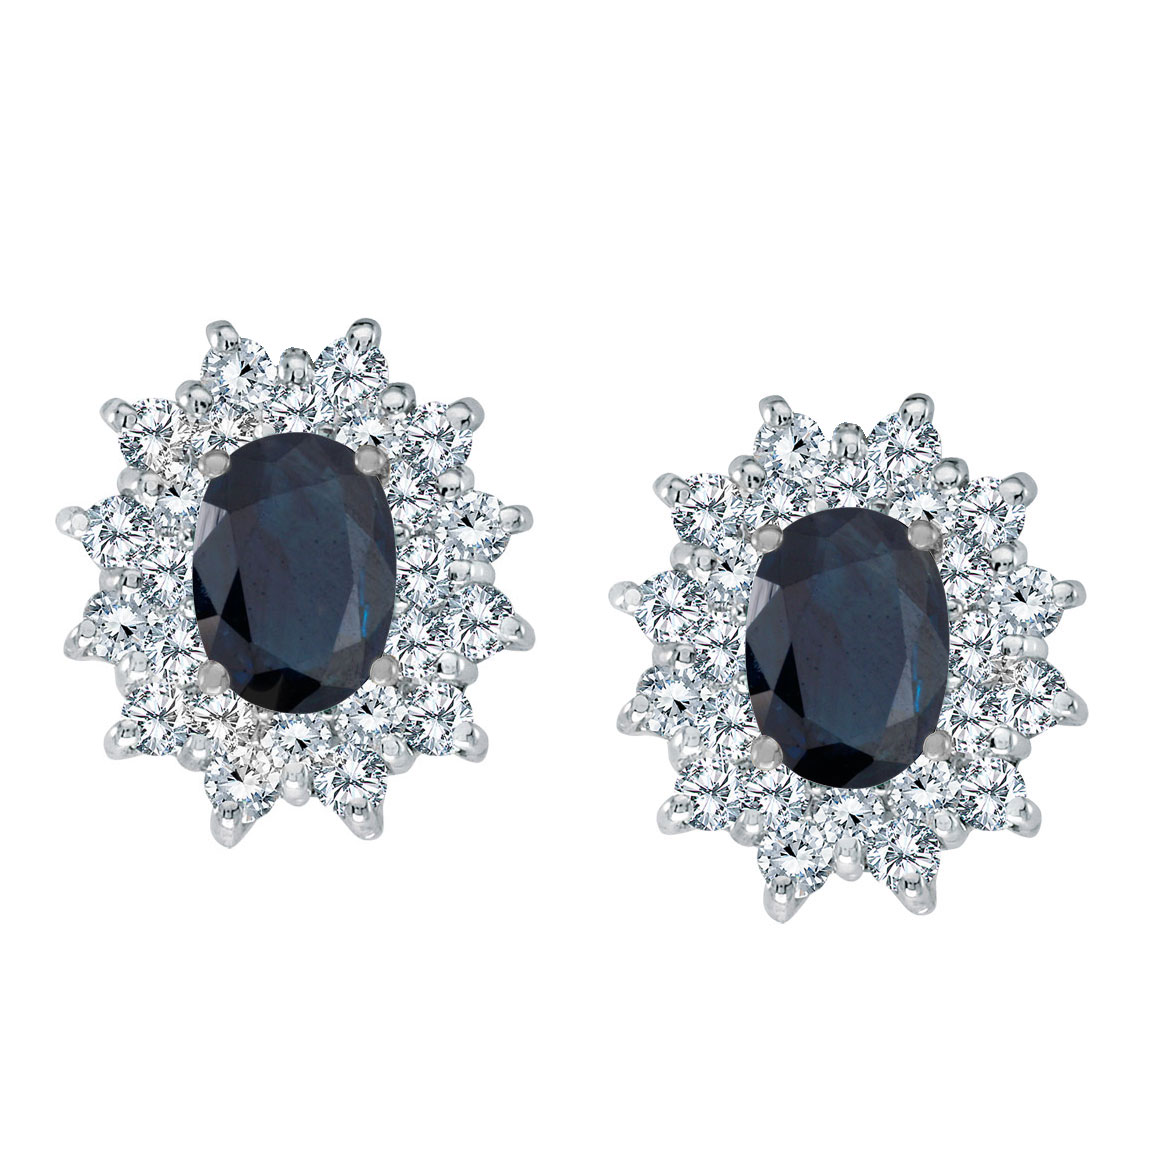 JCX2289: Bright 14k white gold earrings featuring 7x5 mm sapphires surrounded by 1.00 total carat of scintillating diamonds.